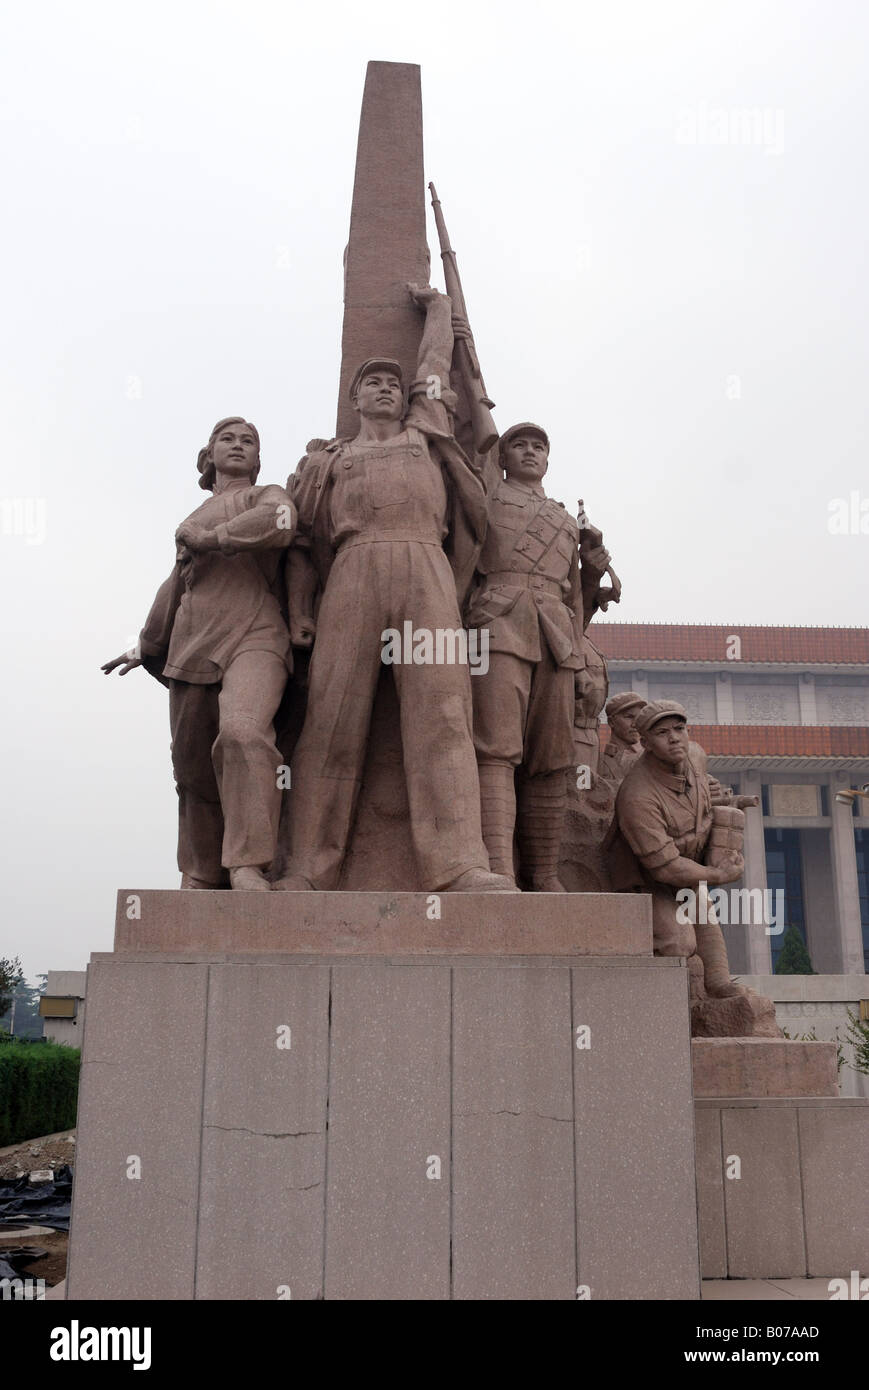 One of the sculptures outside the front of Chairman Mao s mausoleum Tiananmen Square China Asia Beijing Peking City Chairman Mao Stock Photo